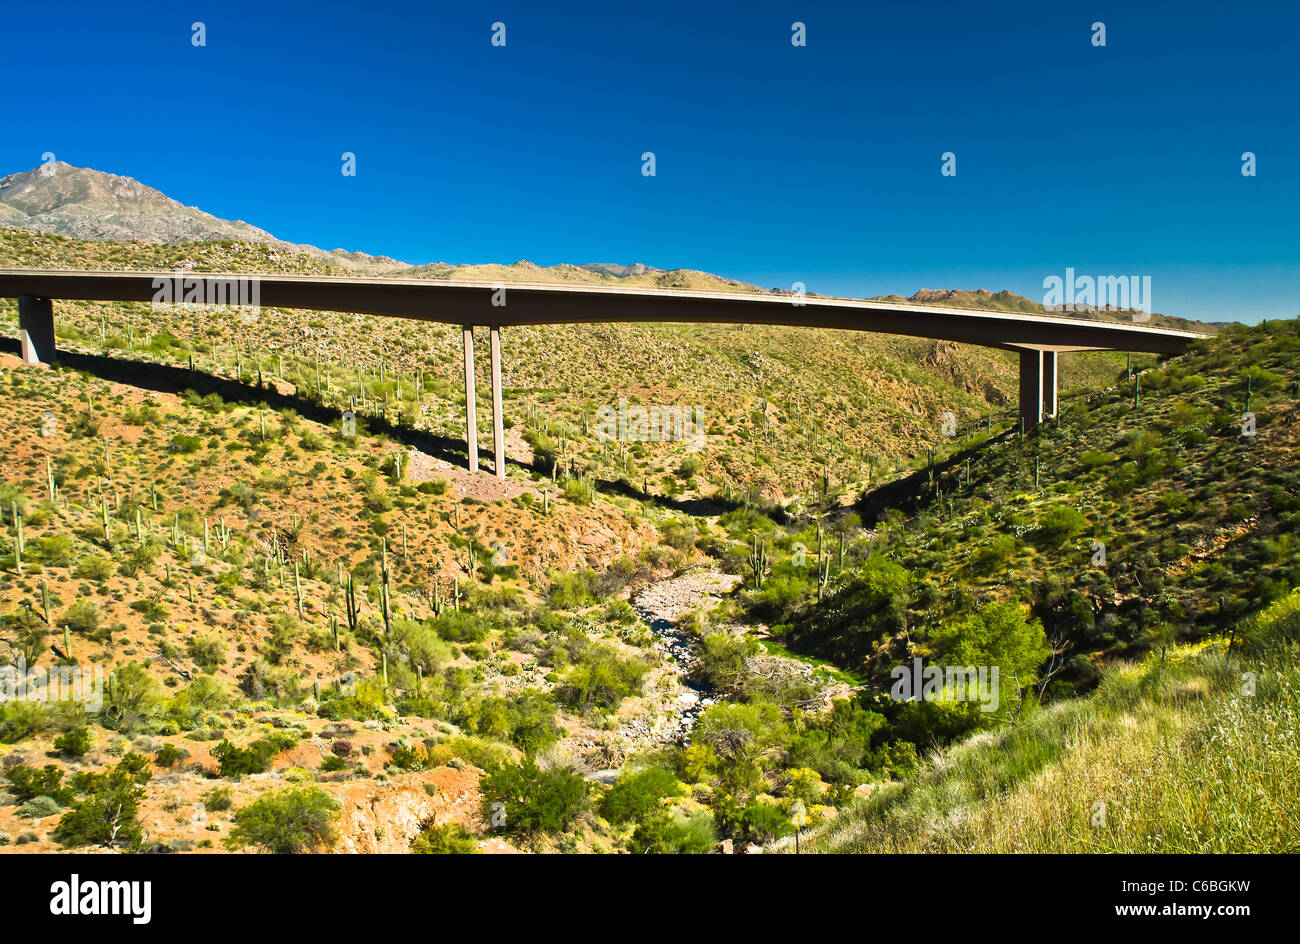 The beeline bridge system was built to replace the old highway system. Stock Photo